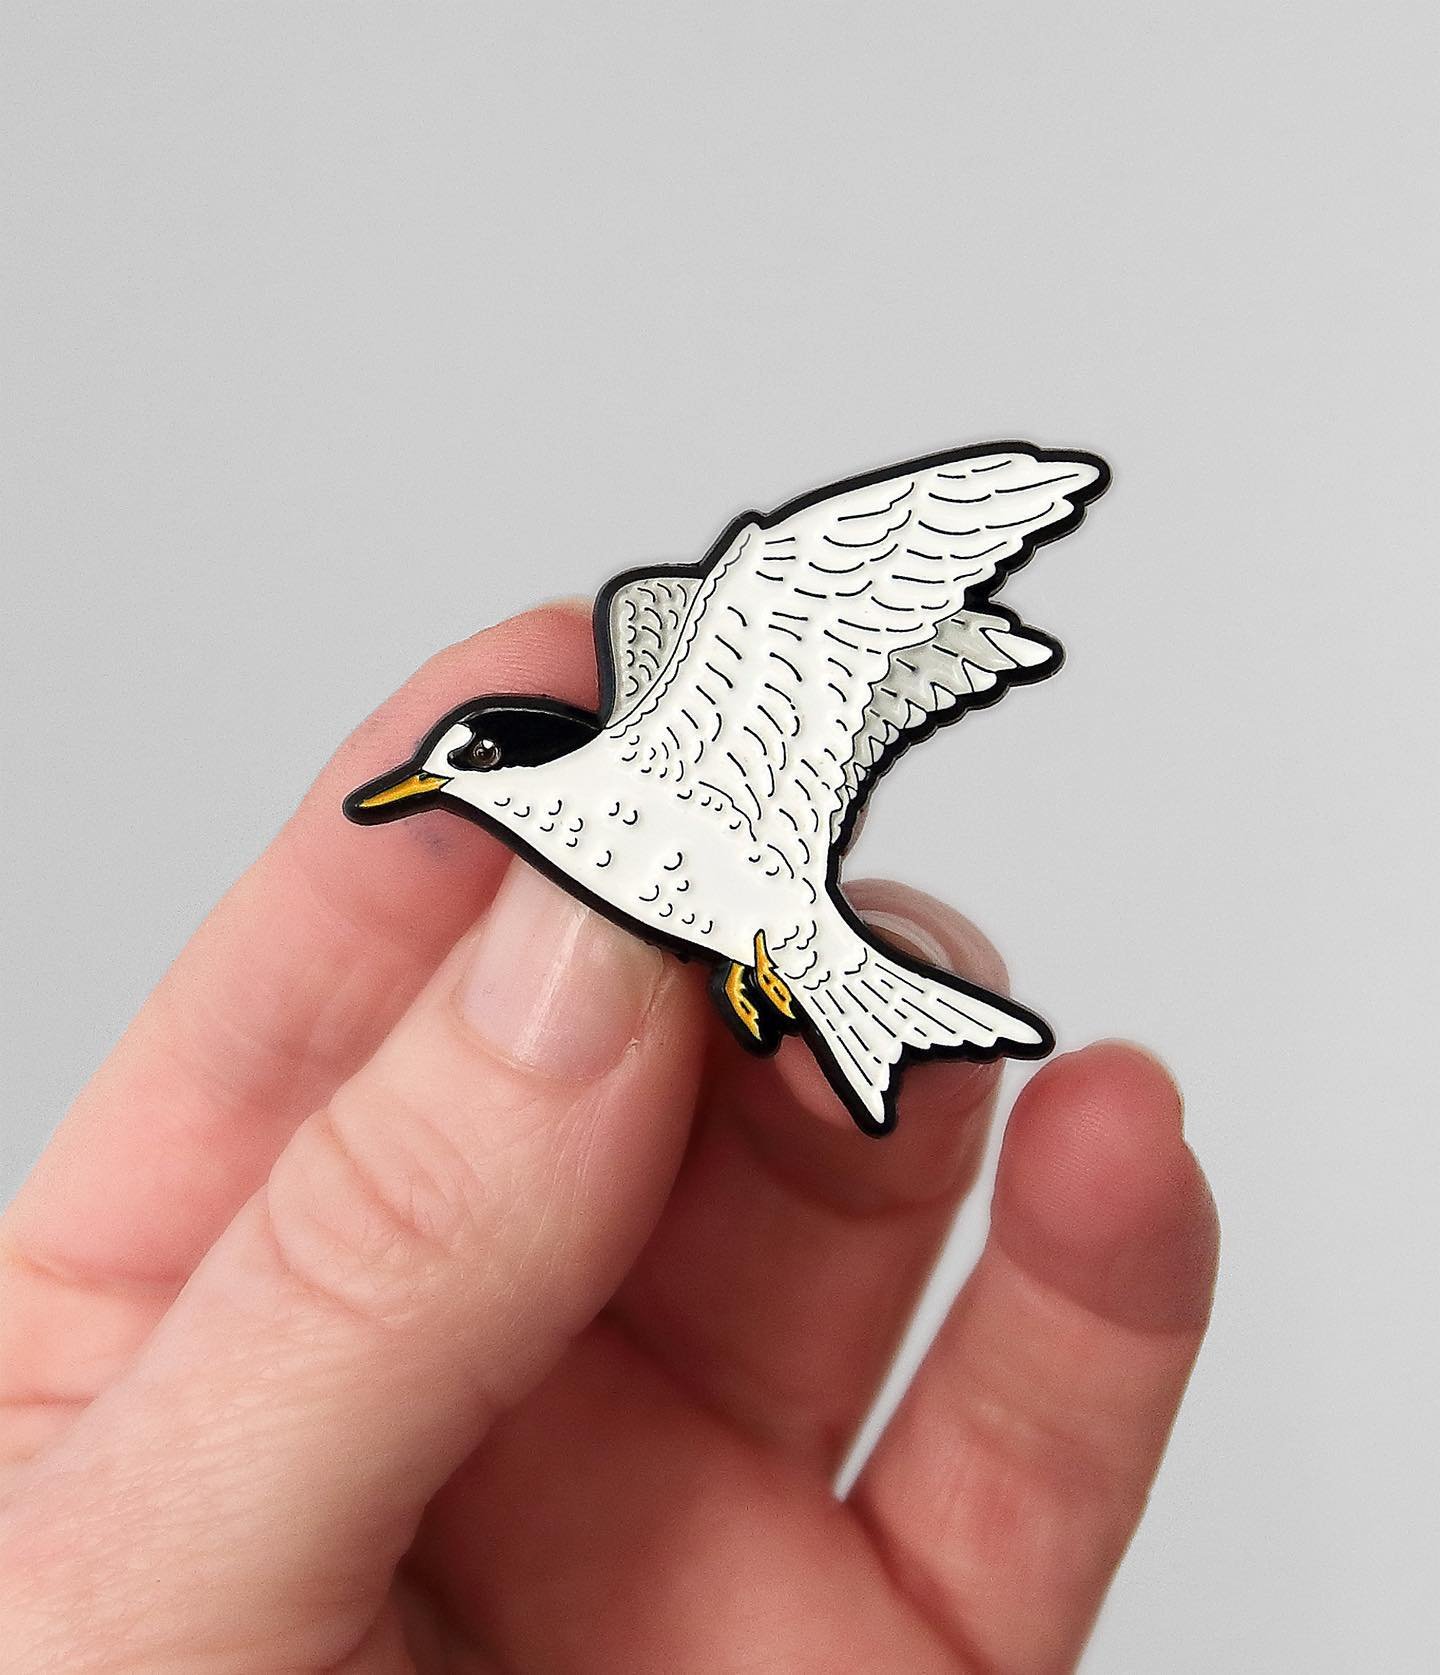 Surprise! Here&rsquo;s another new enamel pin, and it&rsquo;s a tara iti 🤍

I&rsquo;ve always had a soft spot for tara iti / fairy terns, they&rsquo;re our rarest native bird by far - there are only around 40 left! That&rsquo;s their whole populatio